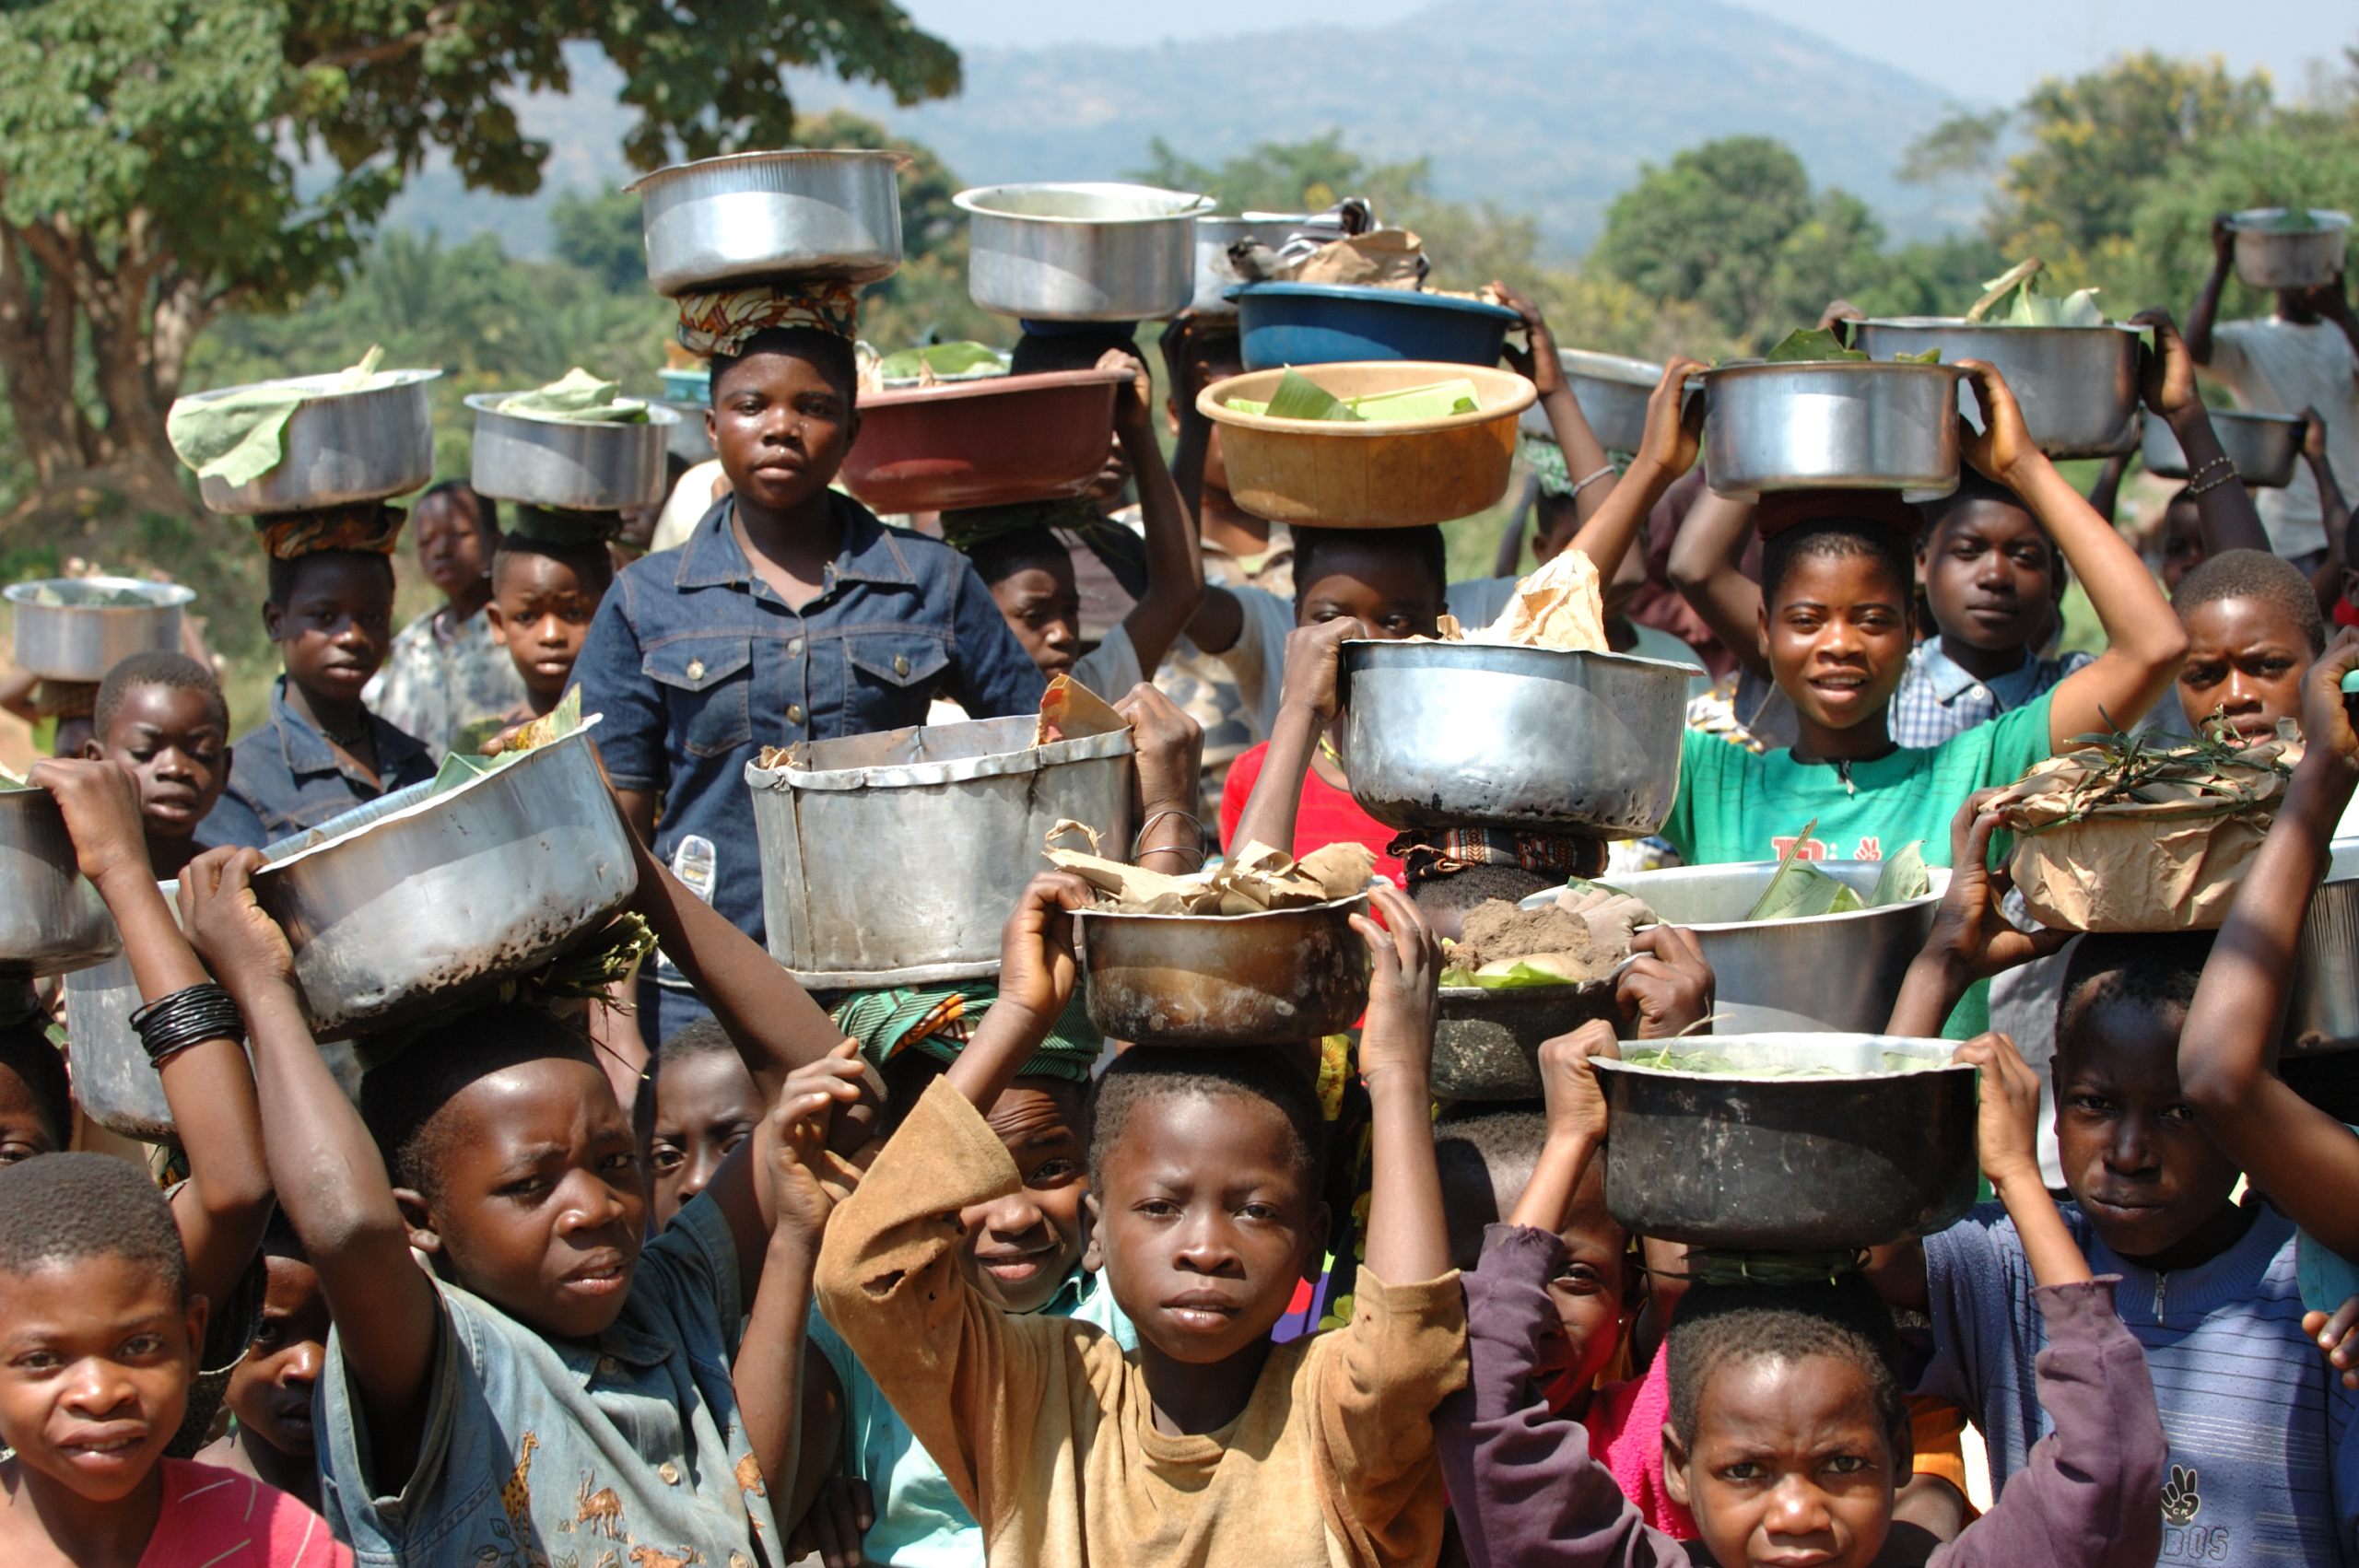 3 Things to Know About Hunger in the Congo Region - The Borgen Project